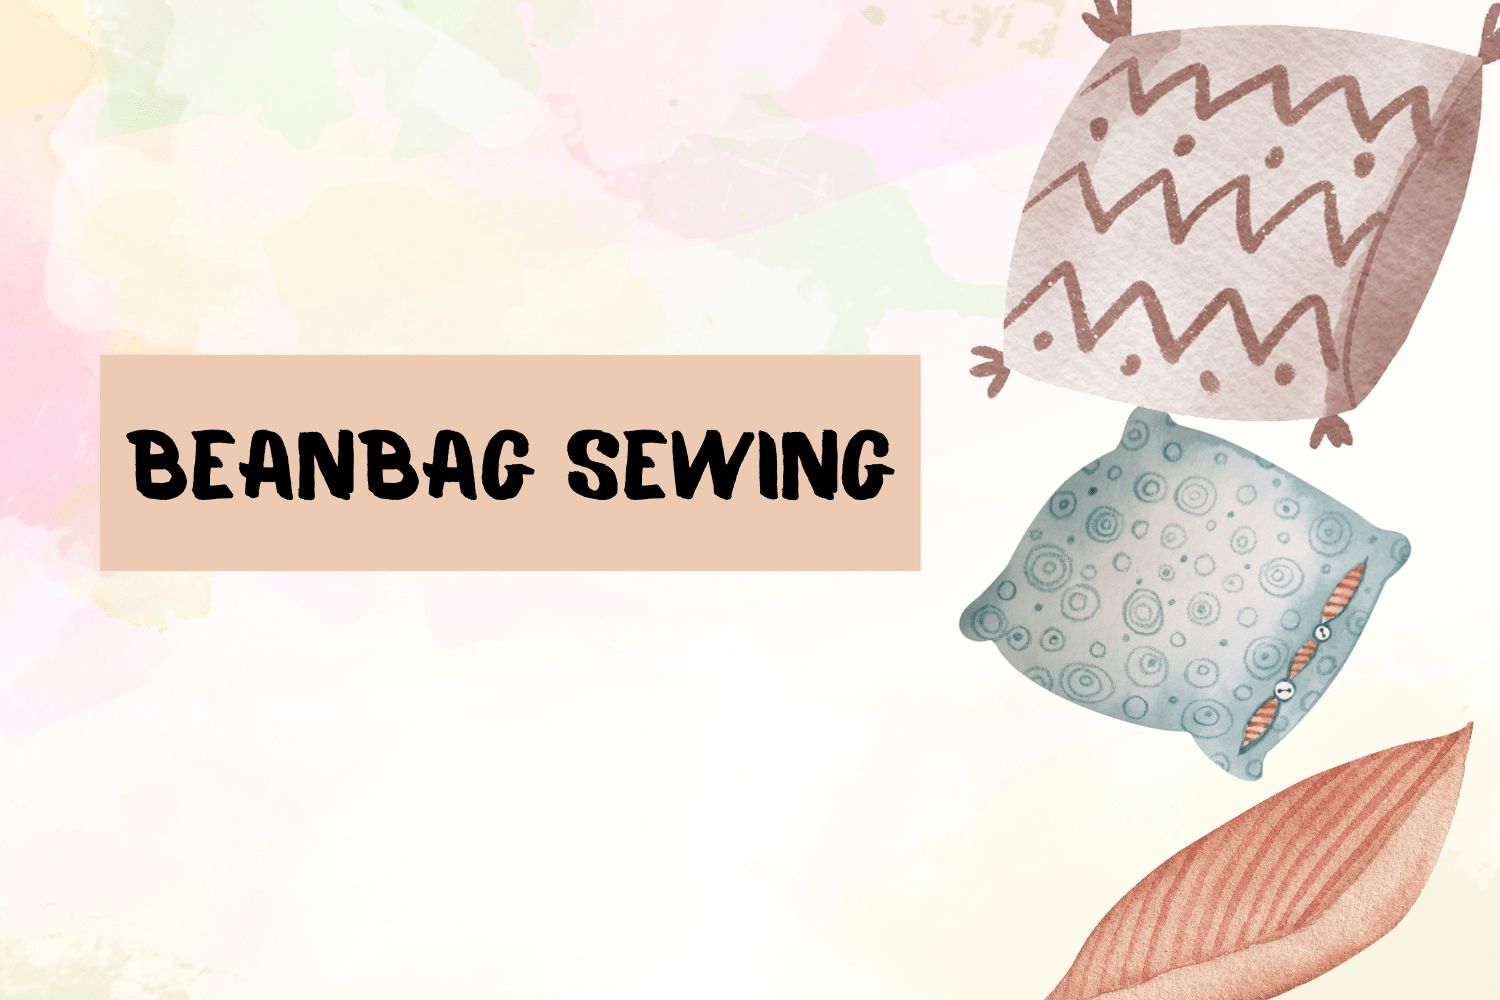 Image that says "beanbag sewing"